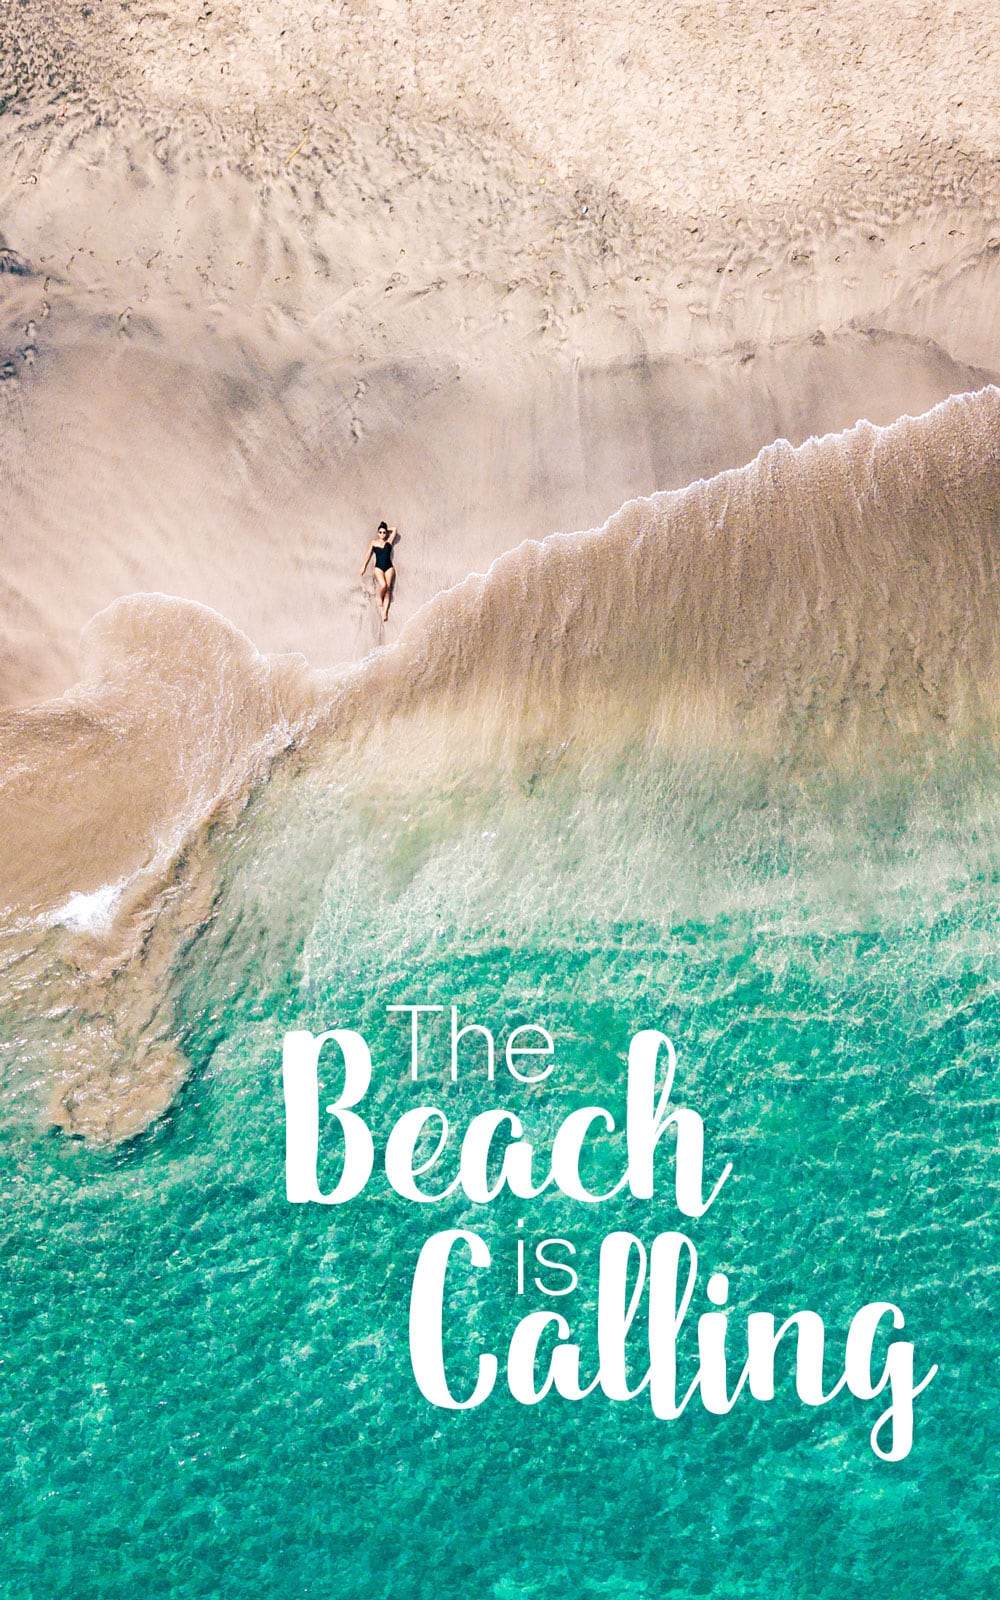 Short & Funny Beach Quotes on Love & Life | 117 Beach Quotes